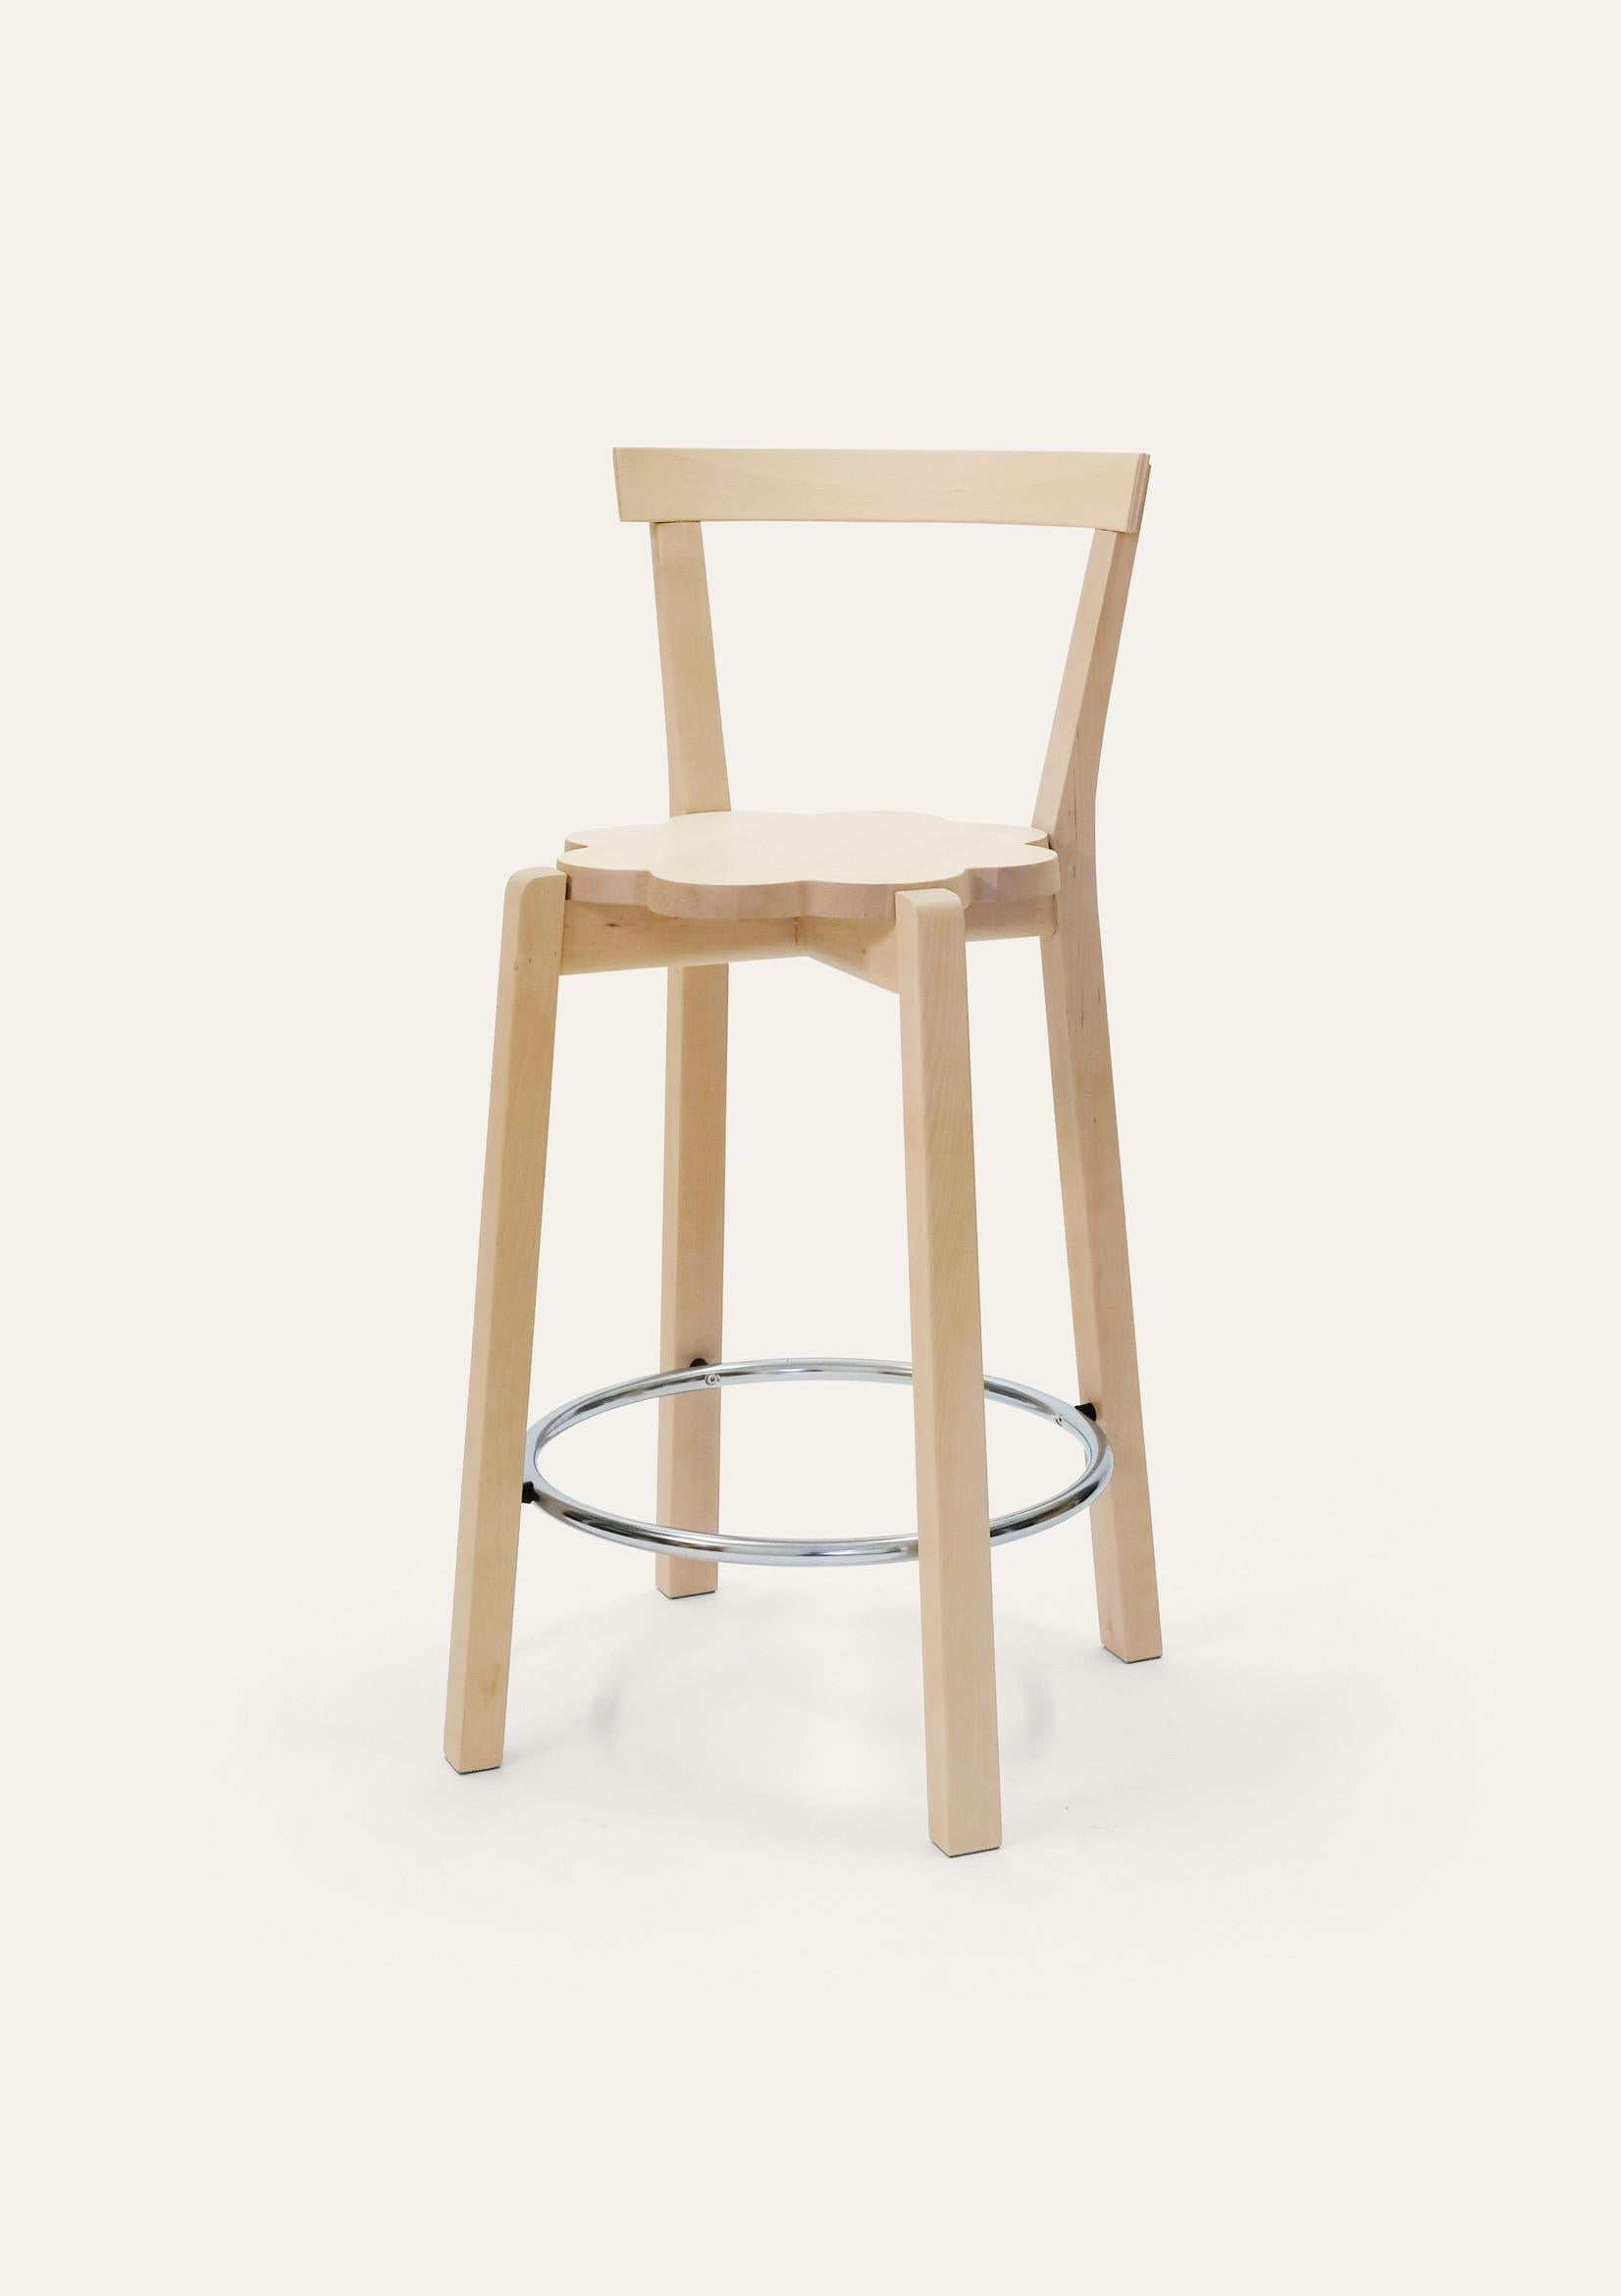 Natural Blossom bar chair by Storängen Design
Dimensions: D 48 x W 43 x H 92 x SH 65 cm
Materials: birch wood, steel.
Available in other colors and sizes. With or without backrest.

A small and neat stackable chair, which works well round